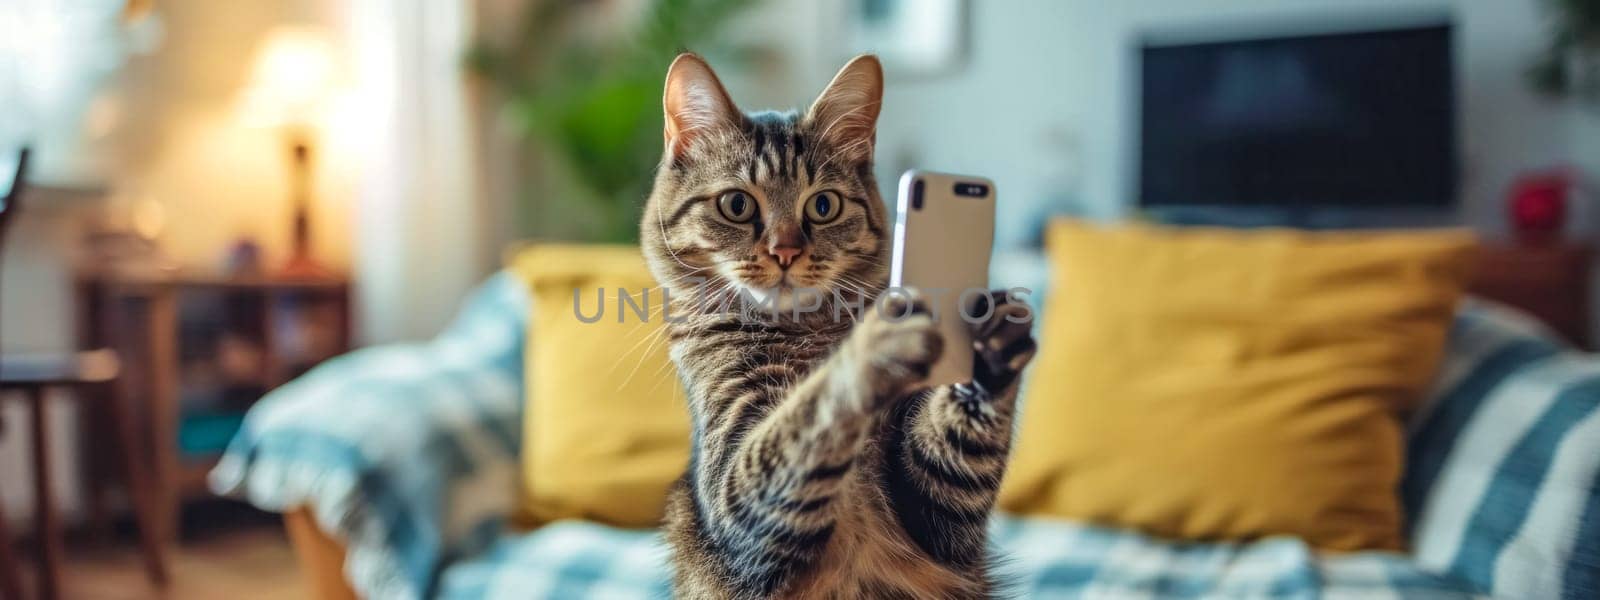 adorable cat holding a smartphone as if taking a selfie, with a cozy home background lit by warm lights. by Edophoto